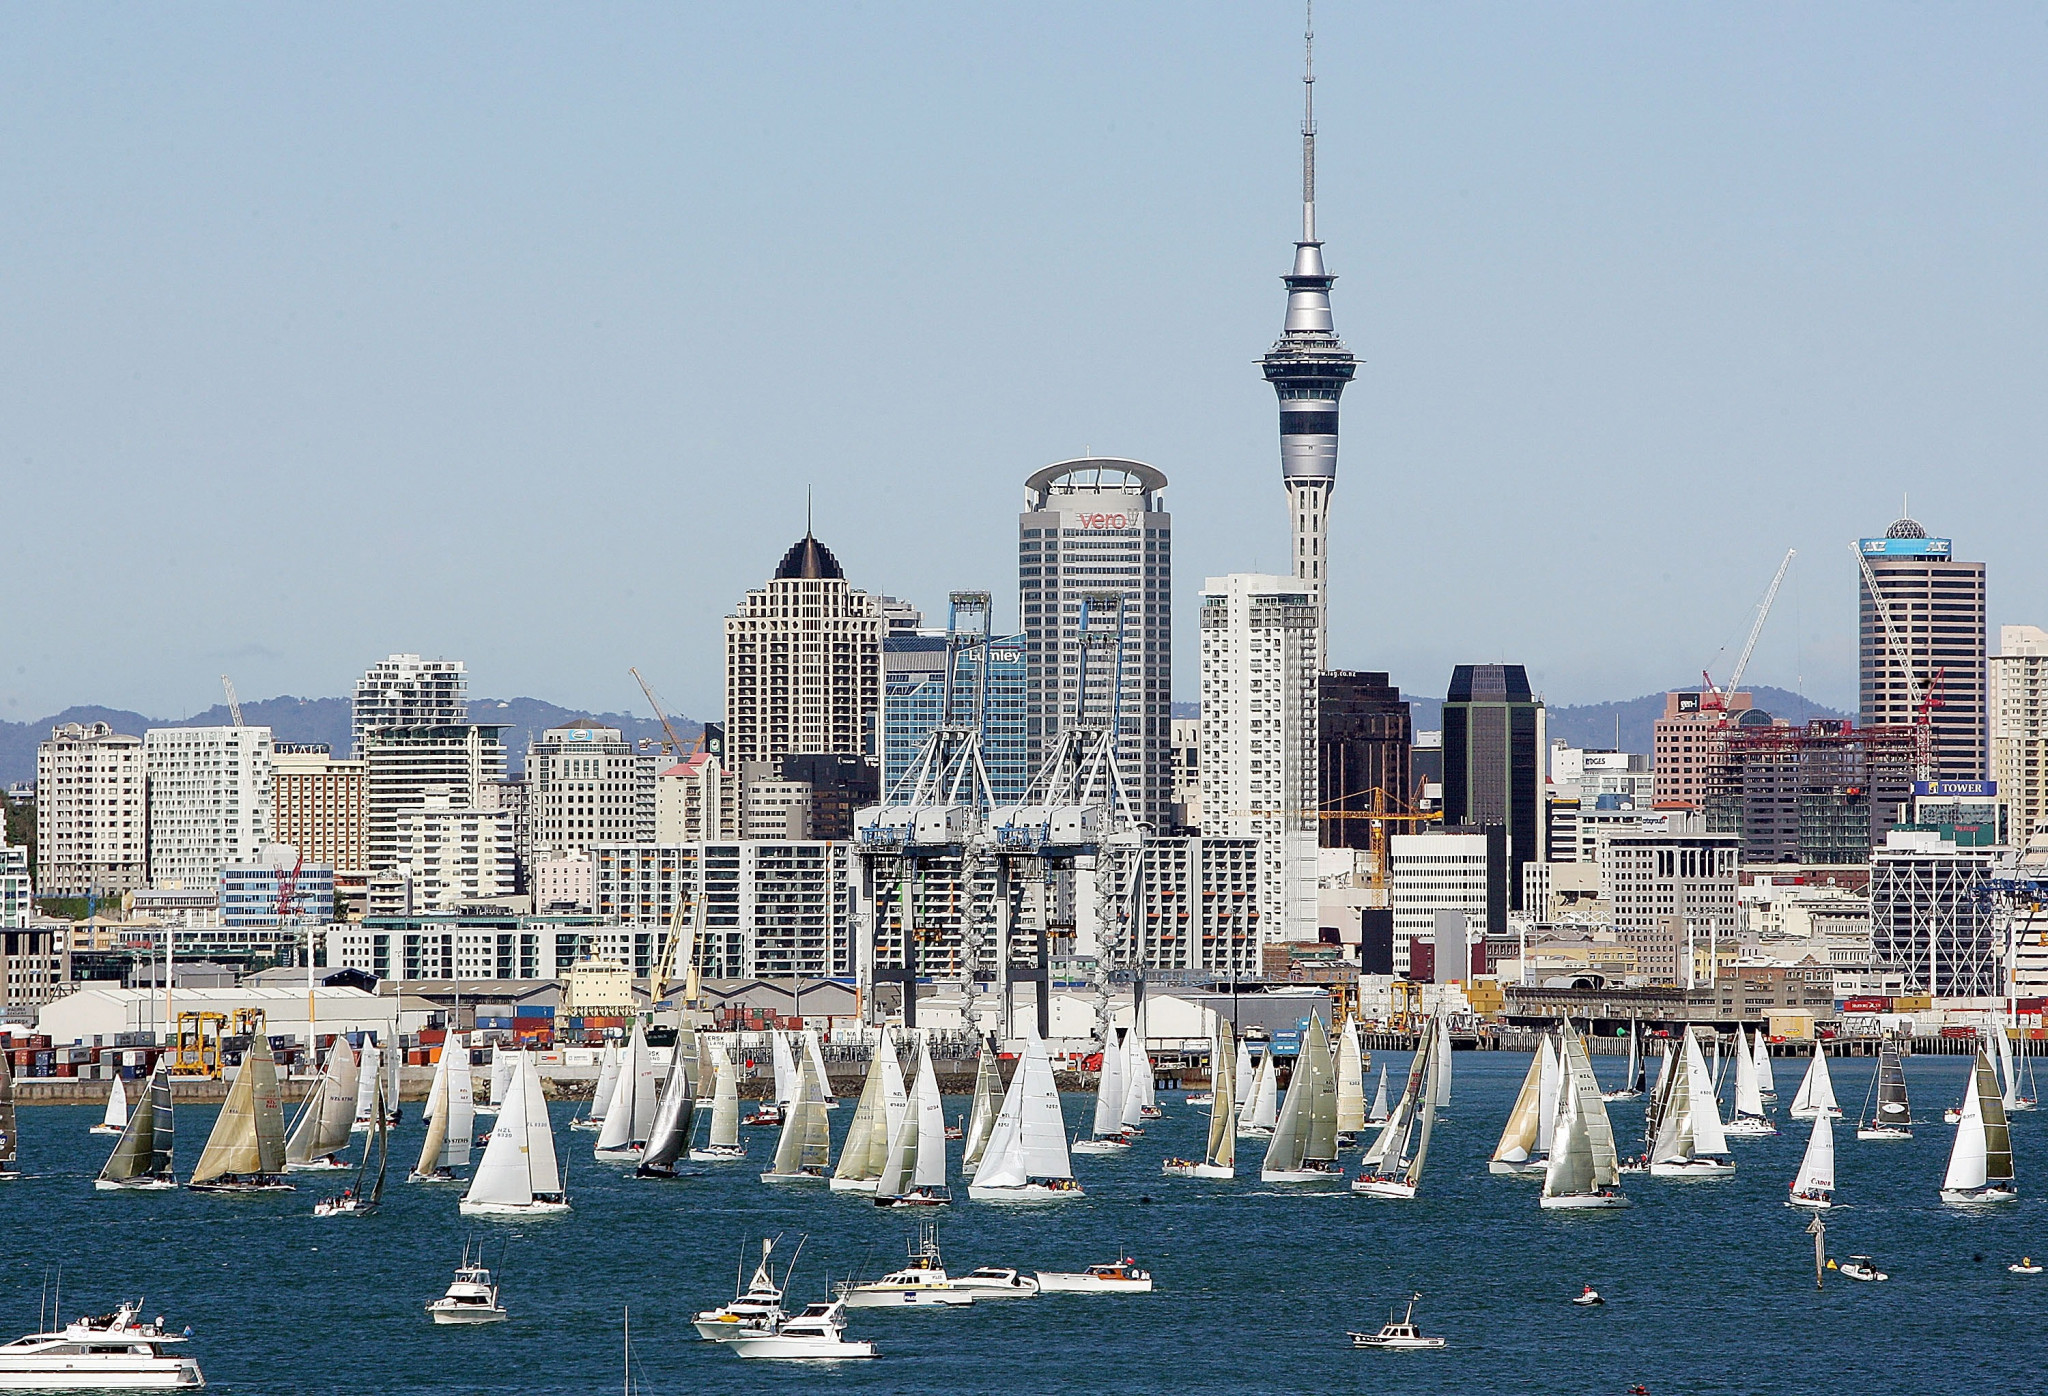 Auckland remains the venue for the next edition of the World Junior Championships ©Getty Images